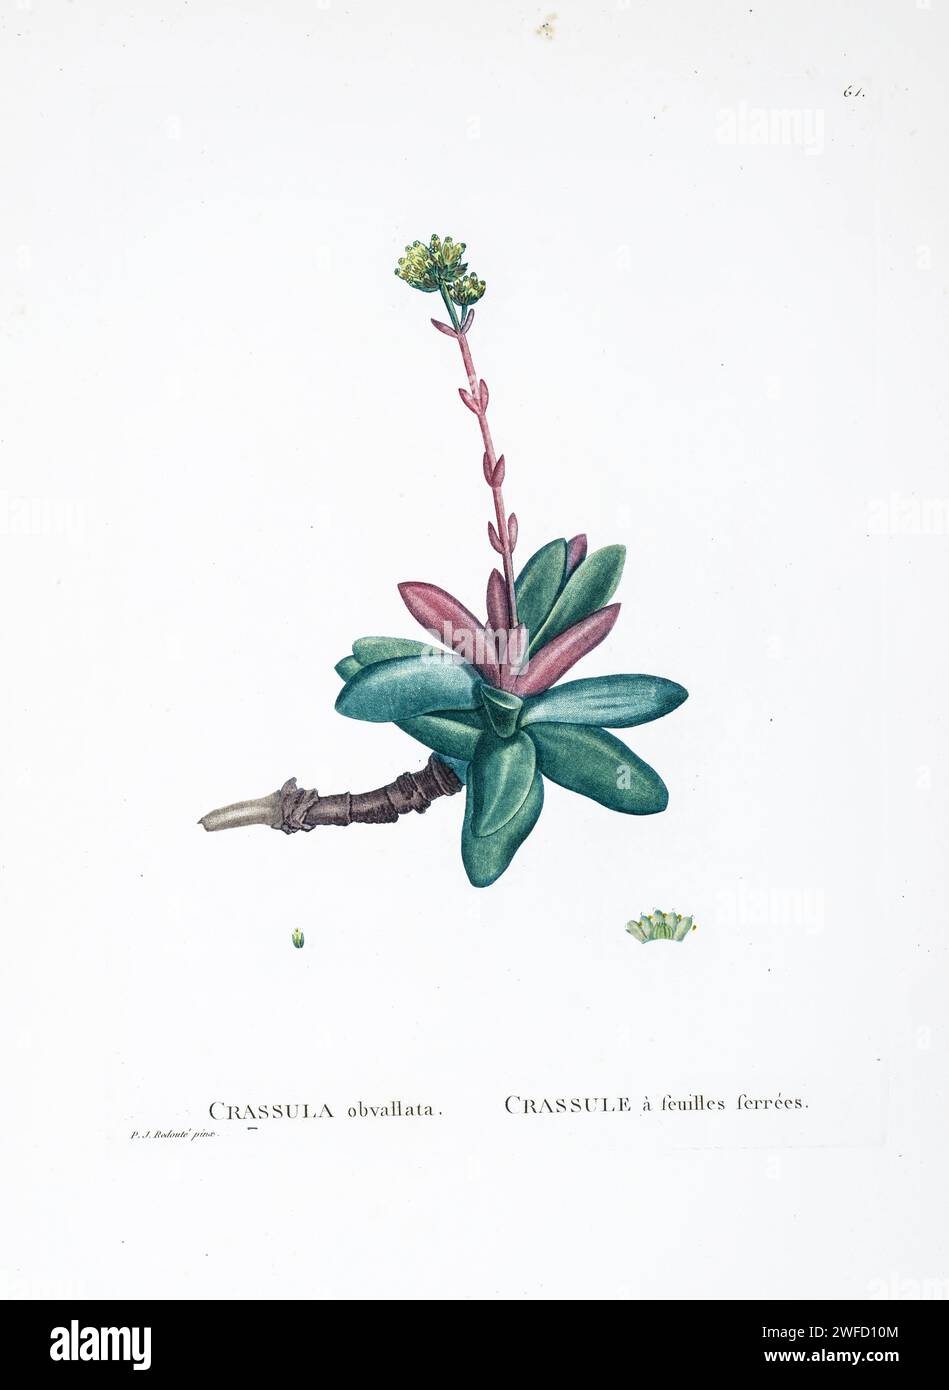 Crassula obvallata L. from History of Succulent Plants [Plantarum historia succulentarum / Histoire des plantes grasses] painted by Pierre-Joseph Redouté and described by Augustin Pyramus de Candolle 1799 Crassula is a genus of succulent plants containing about 200 accepted species, including the popular jade plant. They are members of the stonecrop family and are native to many parts of the globe, but cultivated varieties originate almost exclusively from species from the Eastern Cape of South Africa. Stock Photo